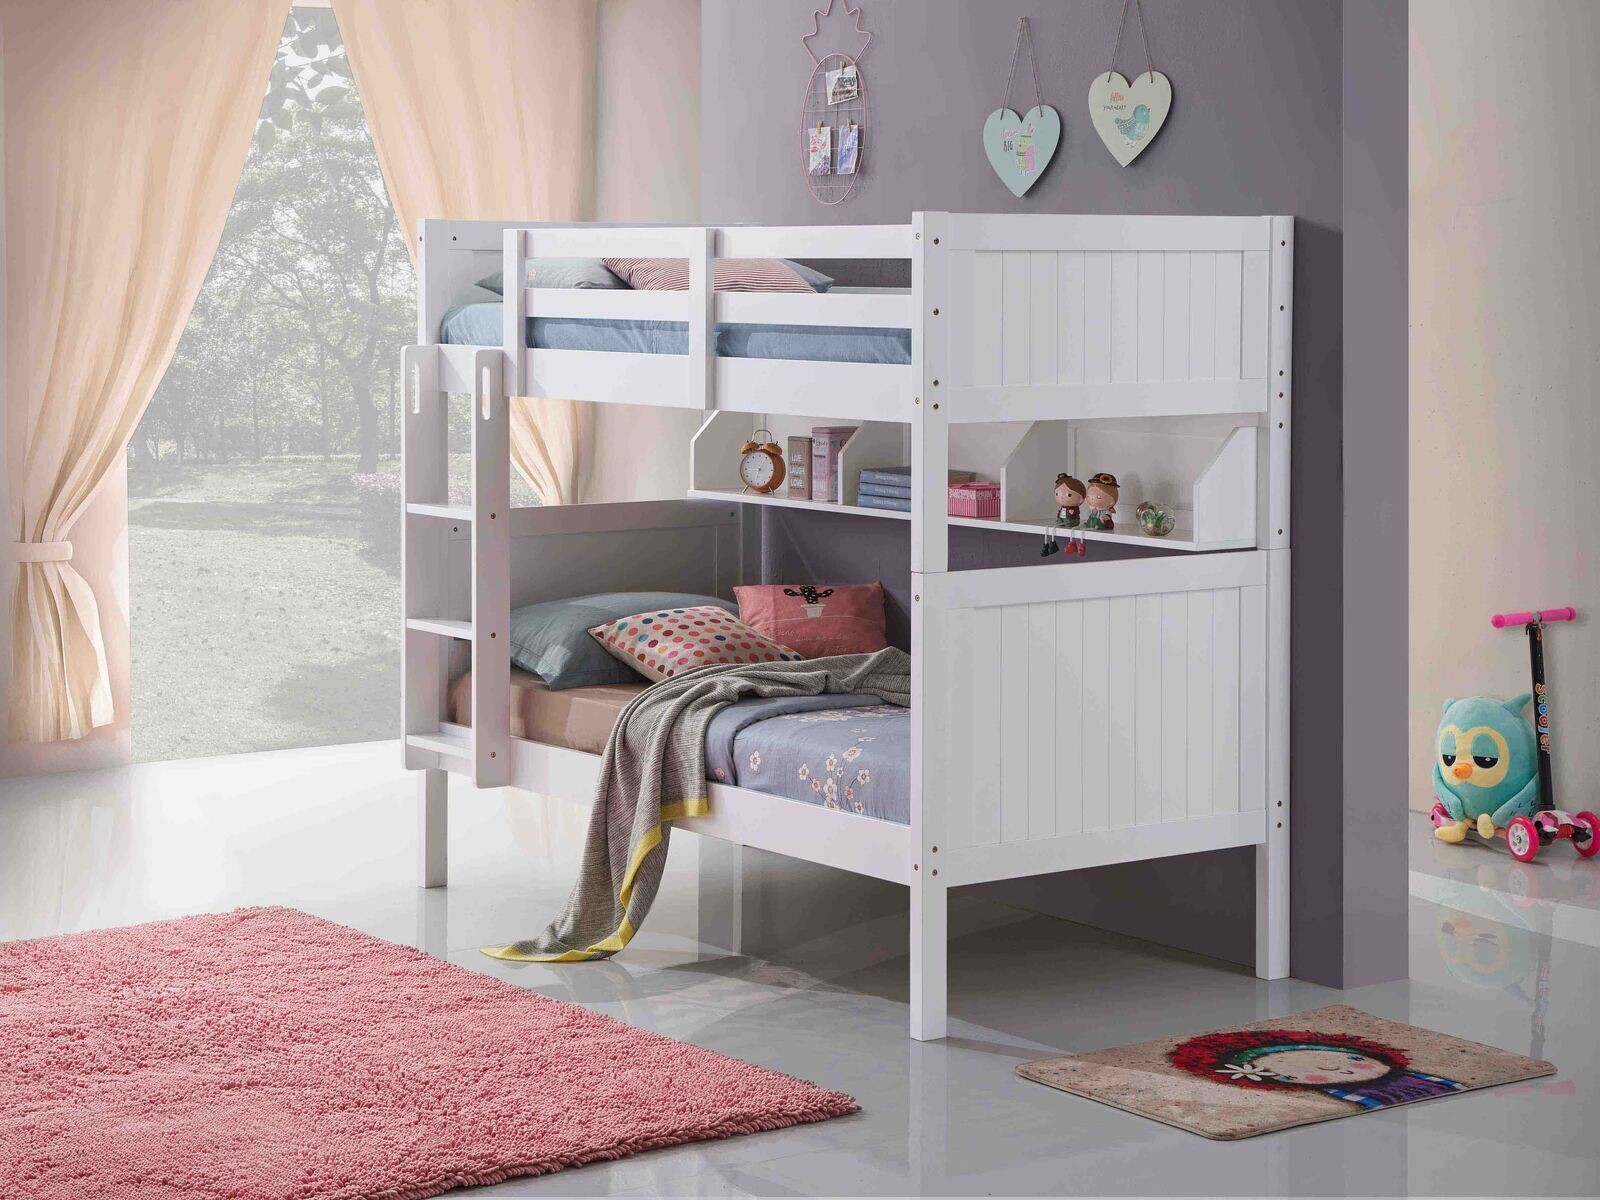 Springfield Single Bunk Bed with Shelves